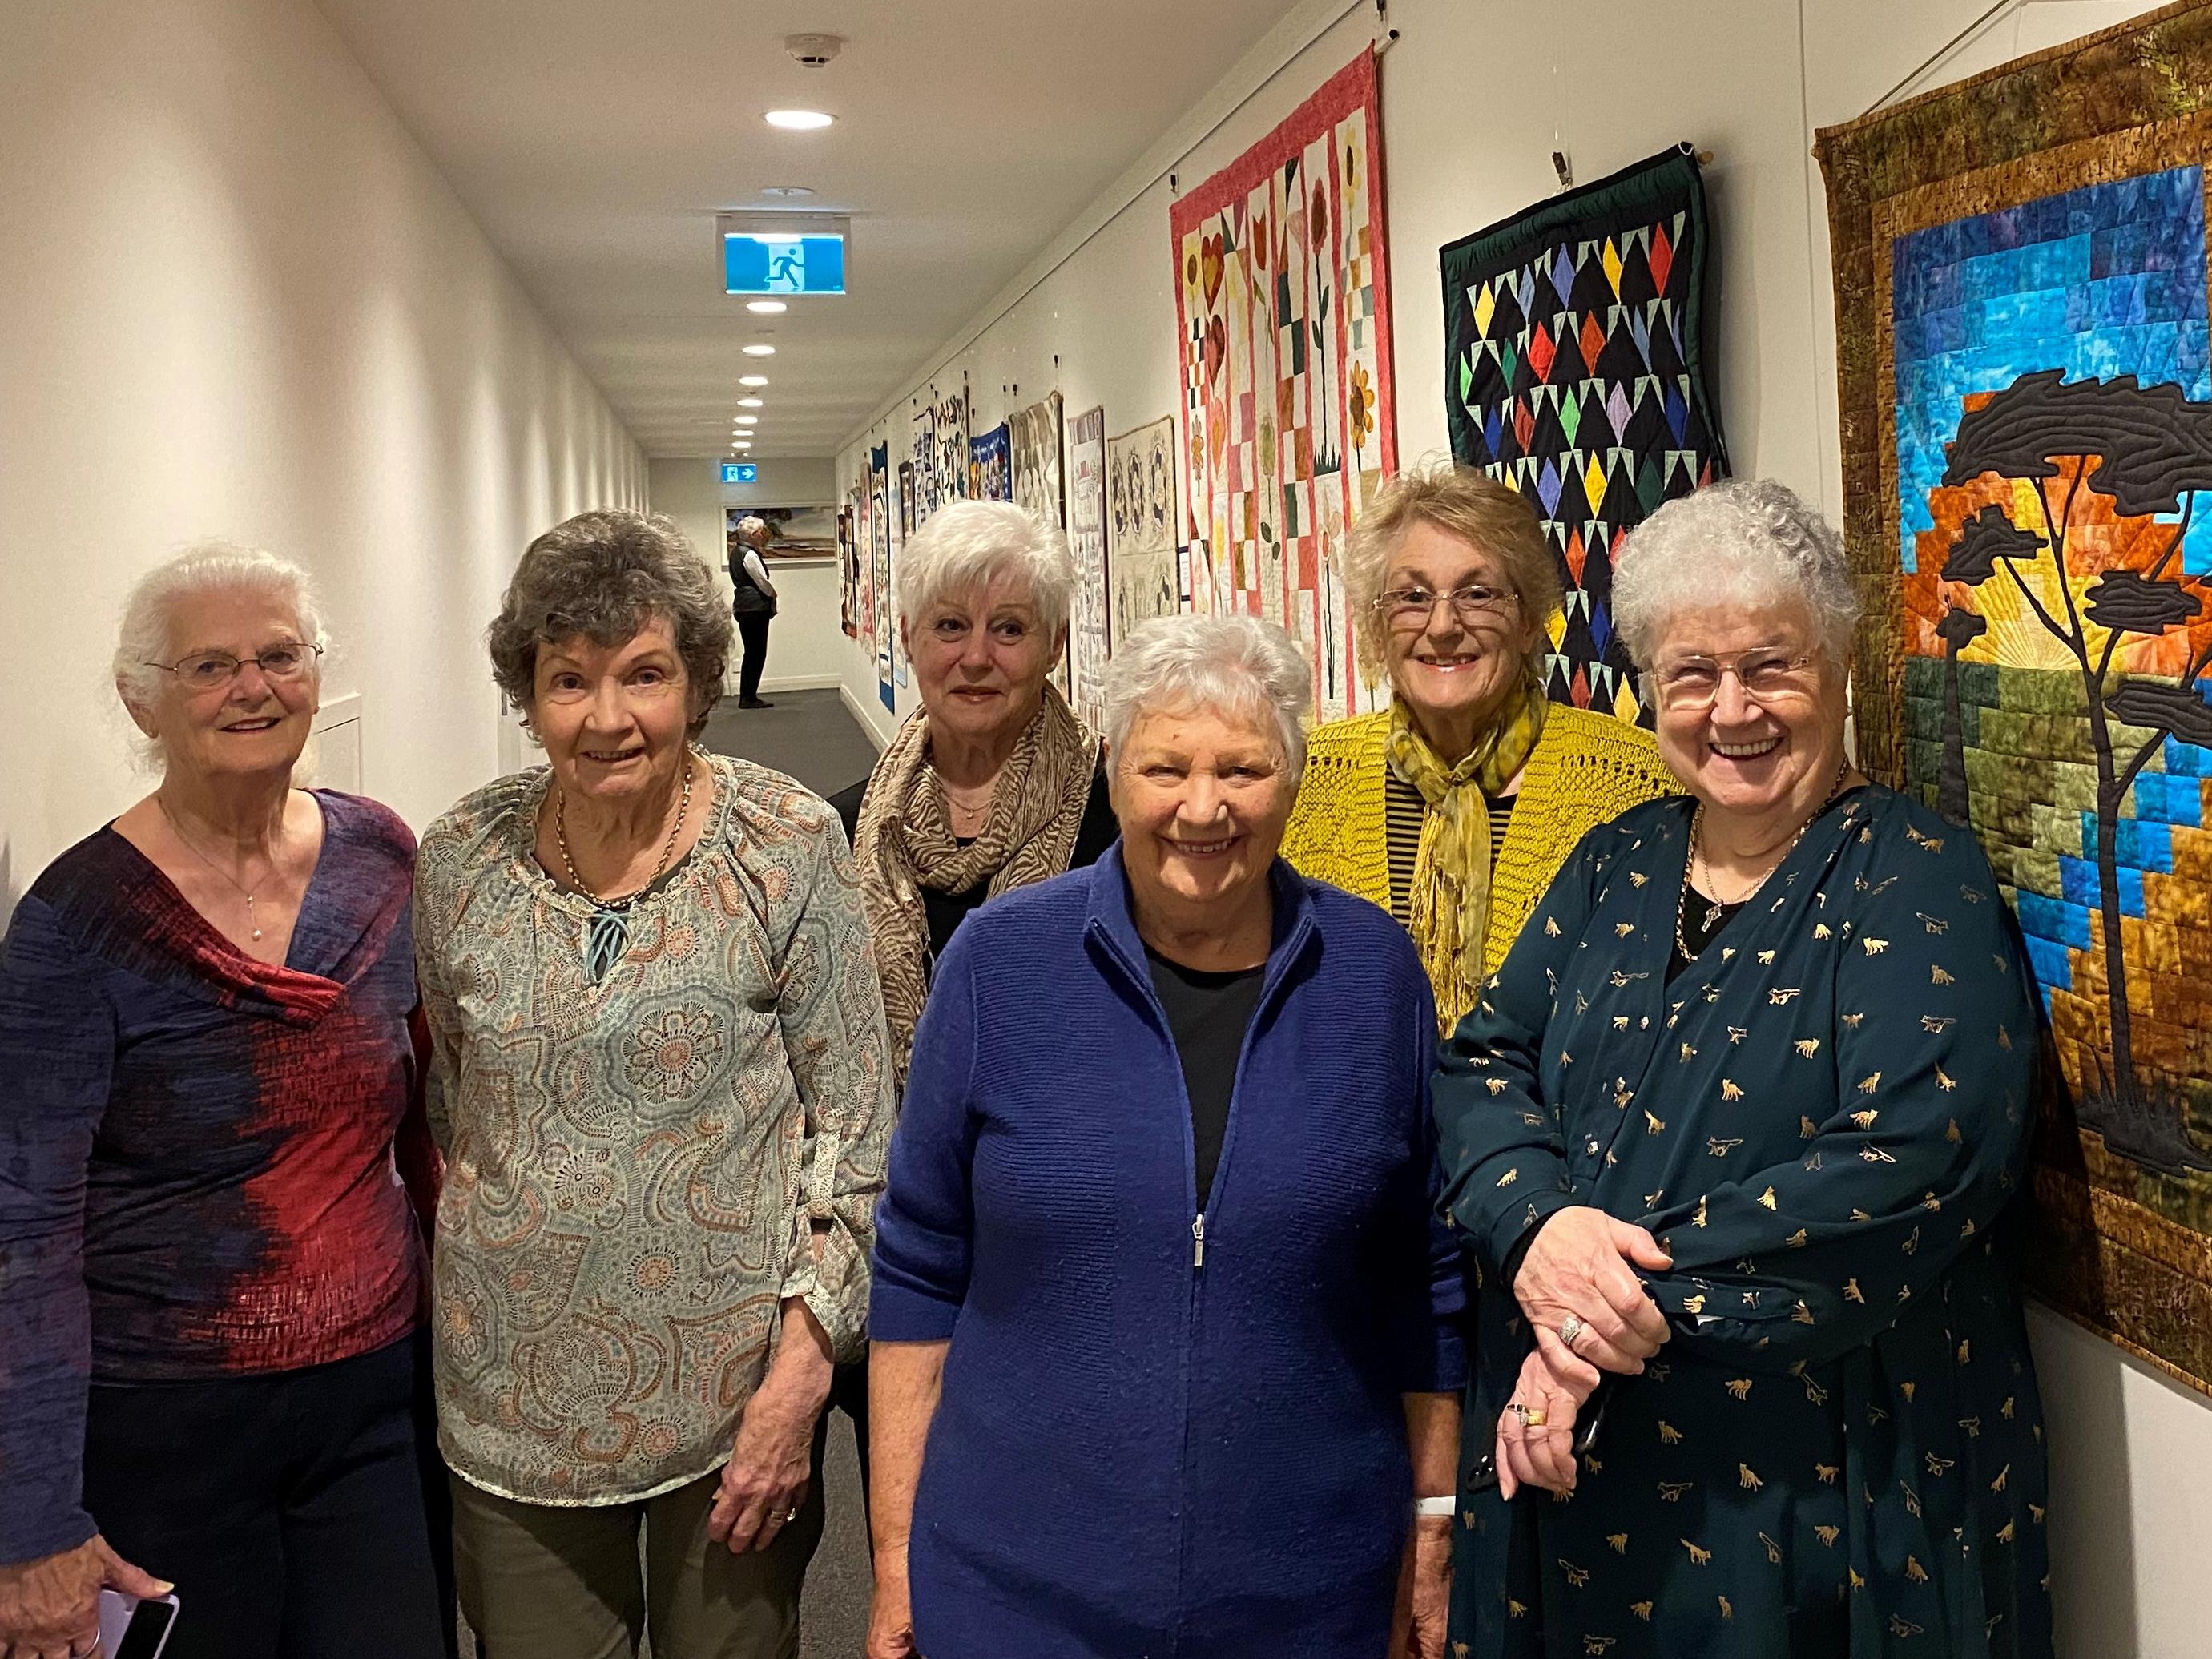 The talented residents who created the quilts